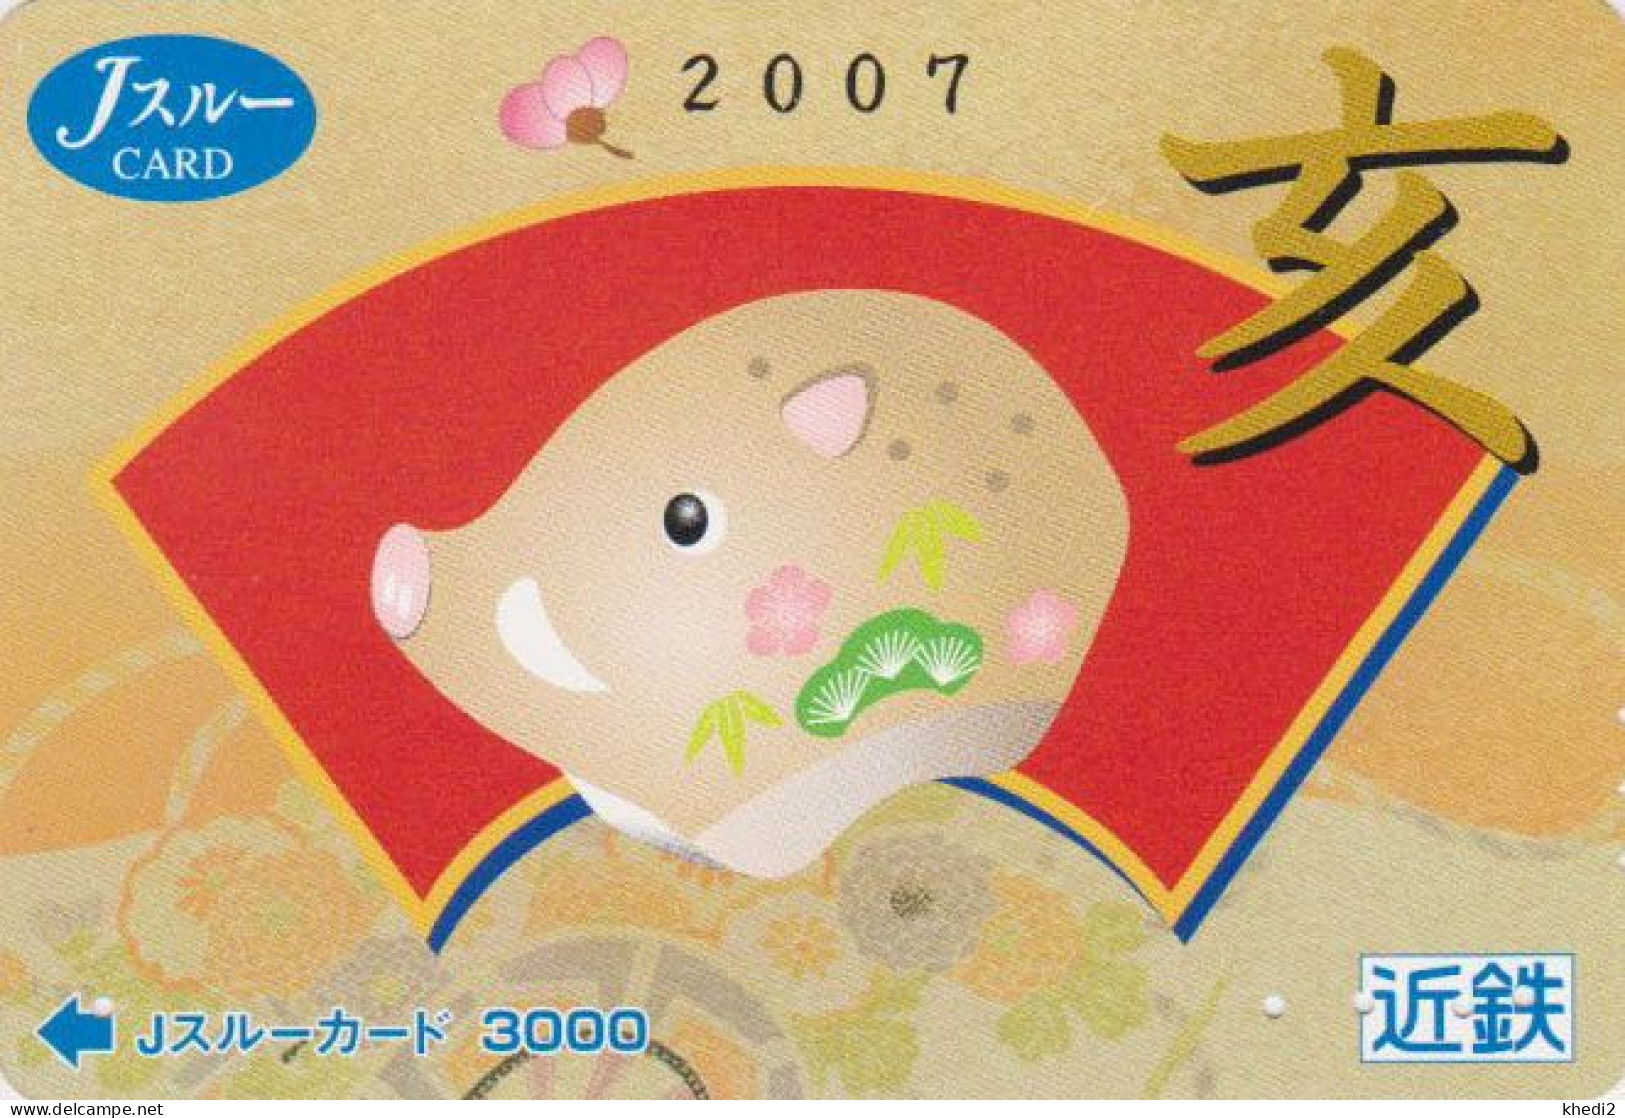 Carte JAPON - ZODIAQUE Chinois 2007 - ANIMAL - SANGLIER - BOAR Chinese Horoscope JAPAN JR J Ticket Card - Zodiaco